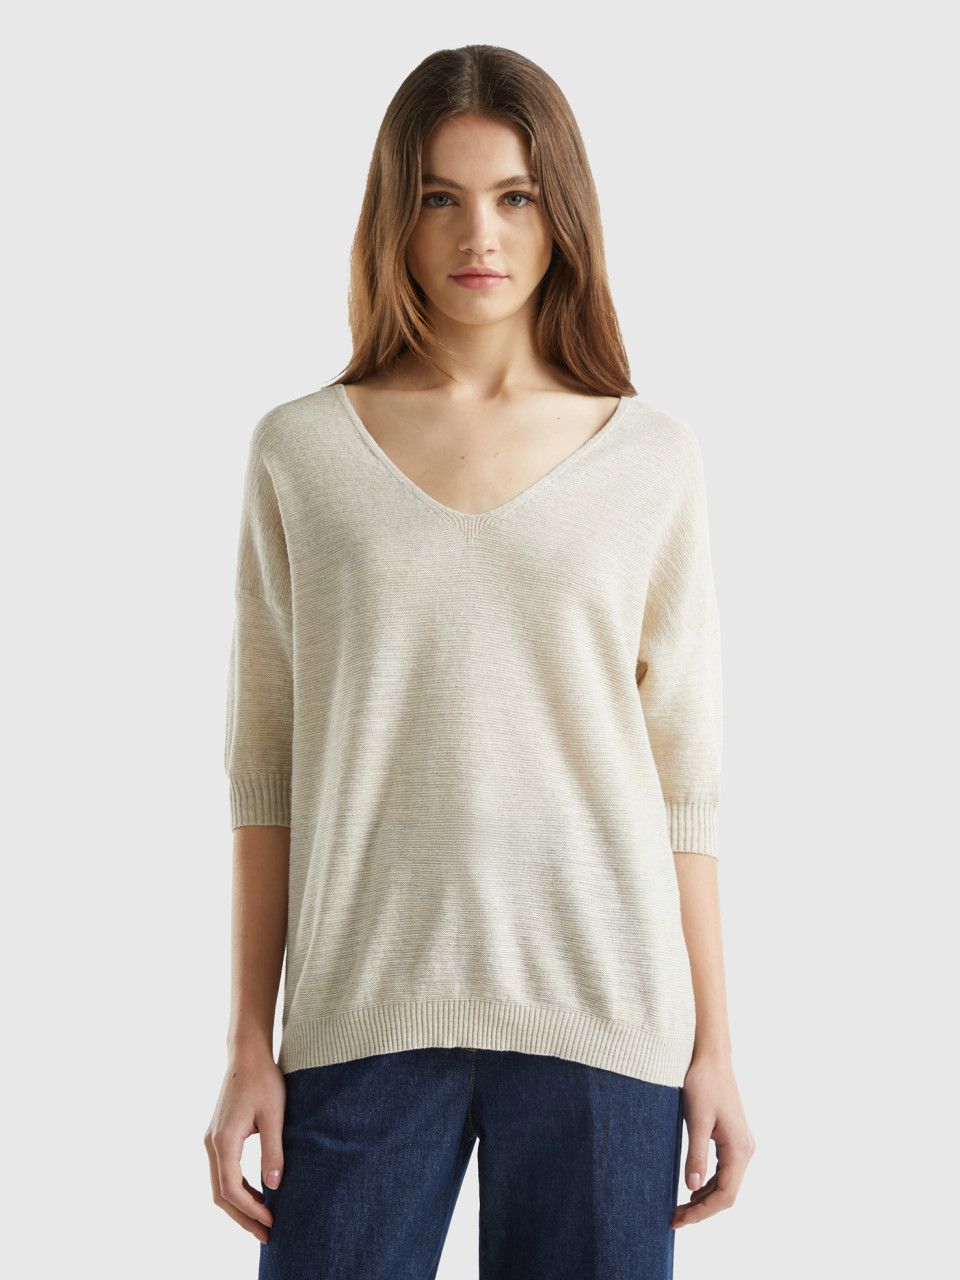 Benetton, Sweater In Linen And Cotton Blend, Creamy White, Women